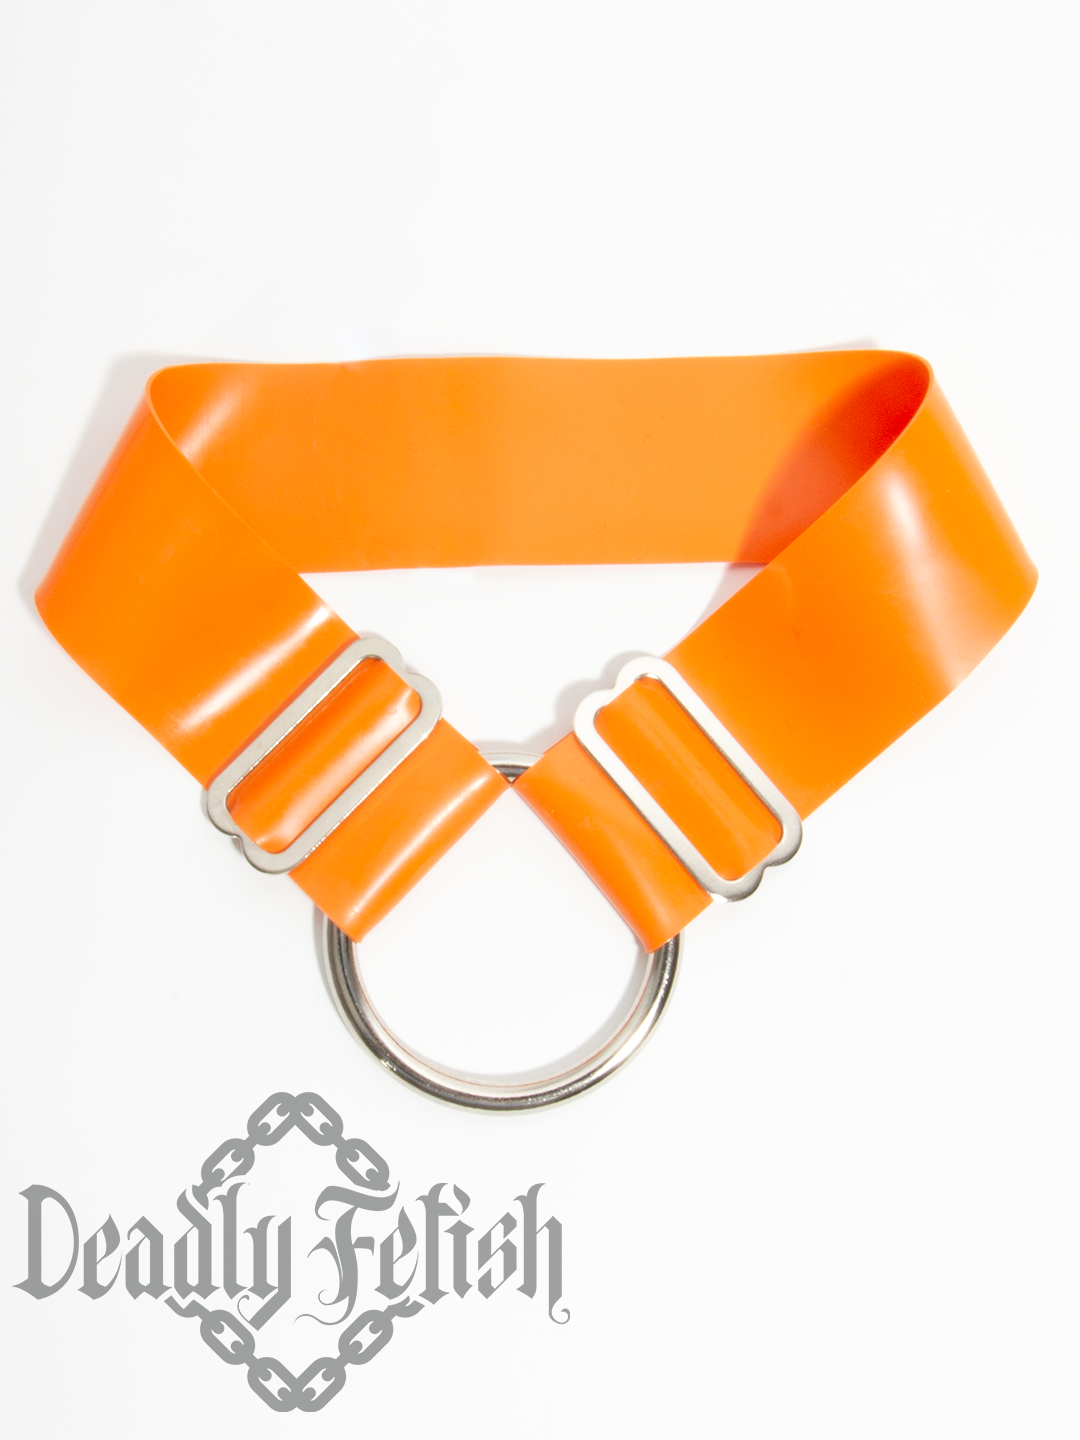 Deadly Fetish Latex: Wide Multi-Use Straps